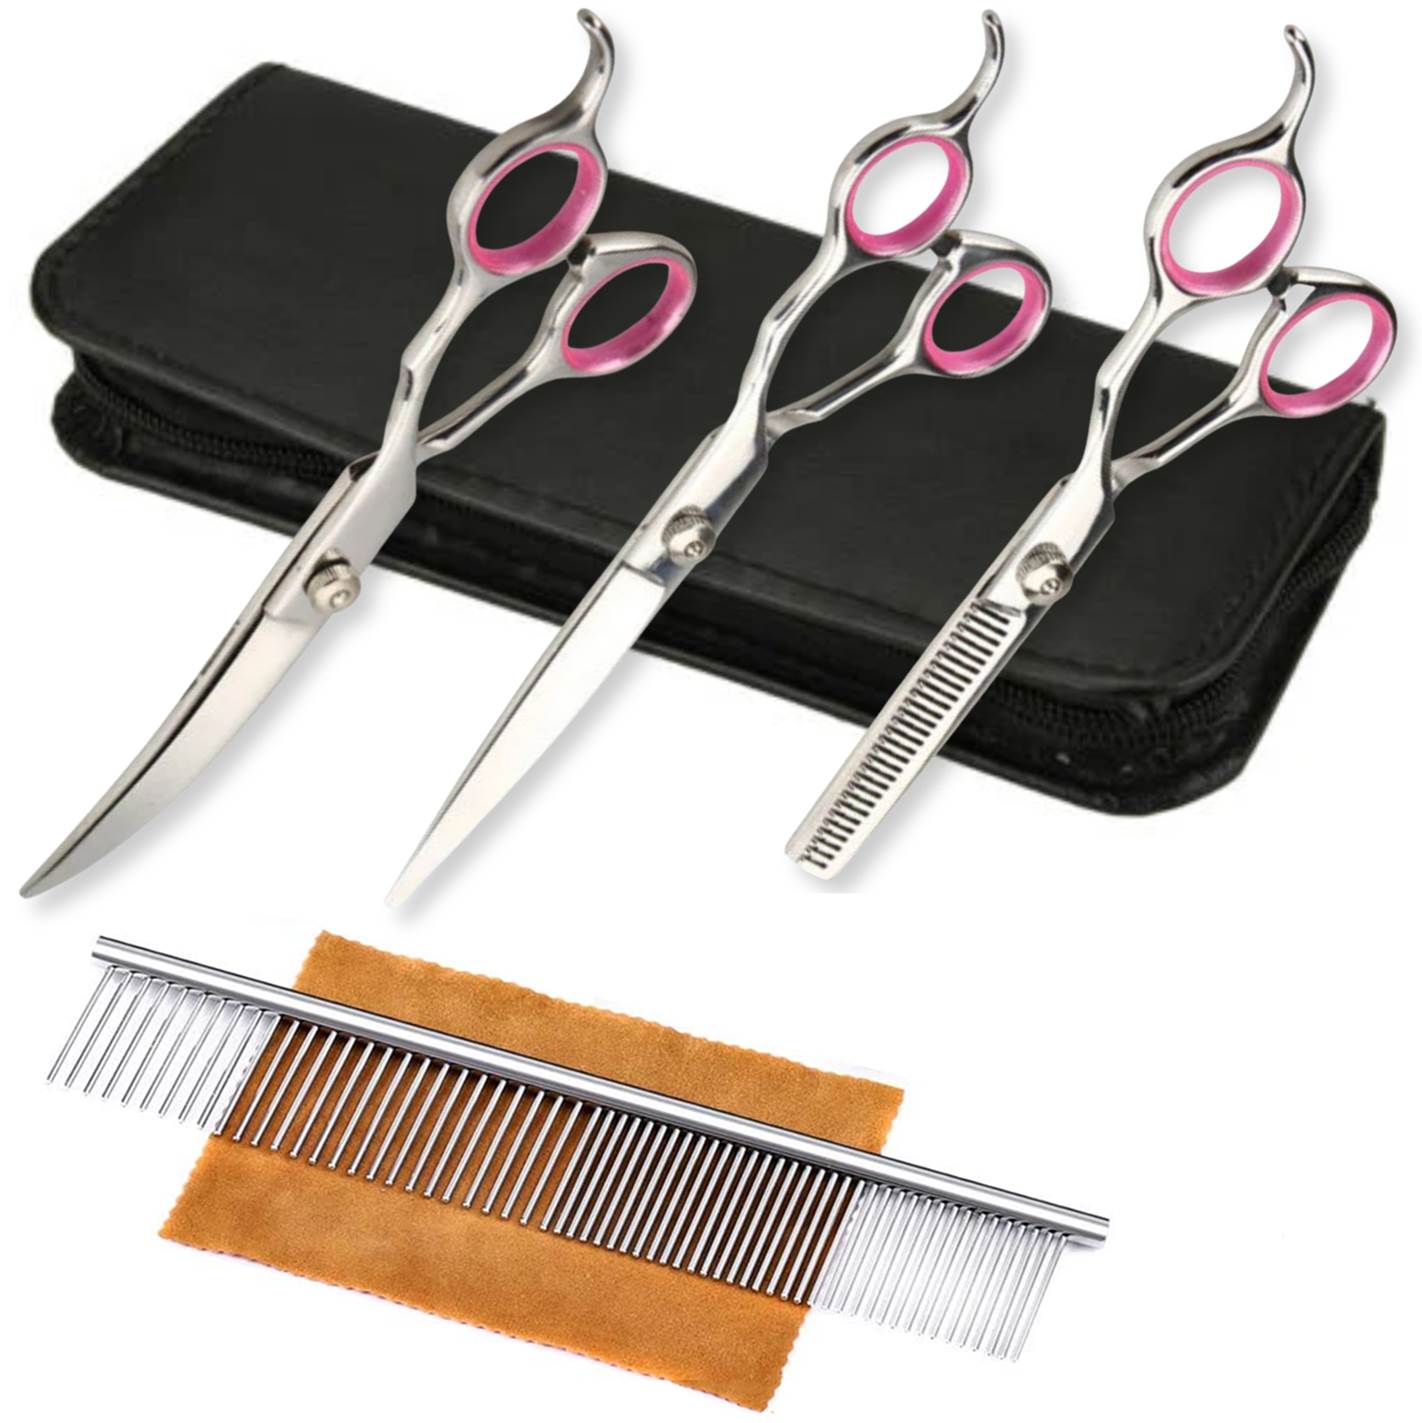 Dog Grooming Kit with Thinning Shears and Curved Scissors for home grooming